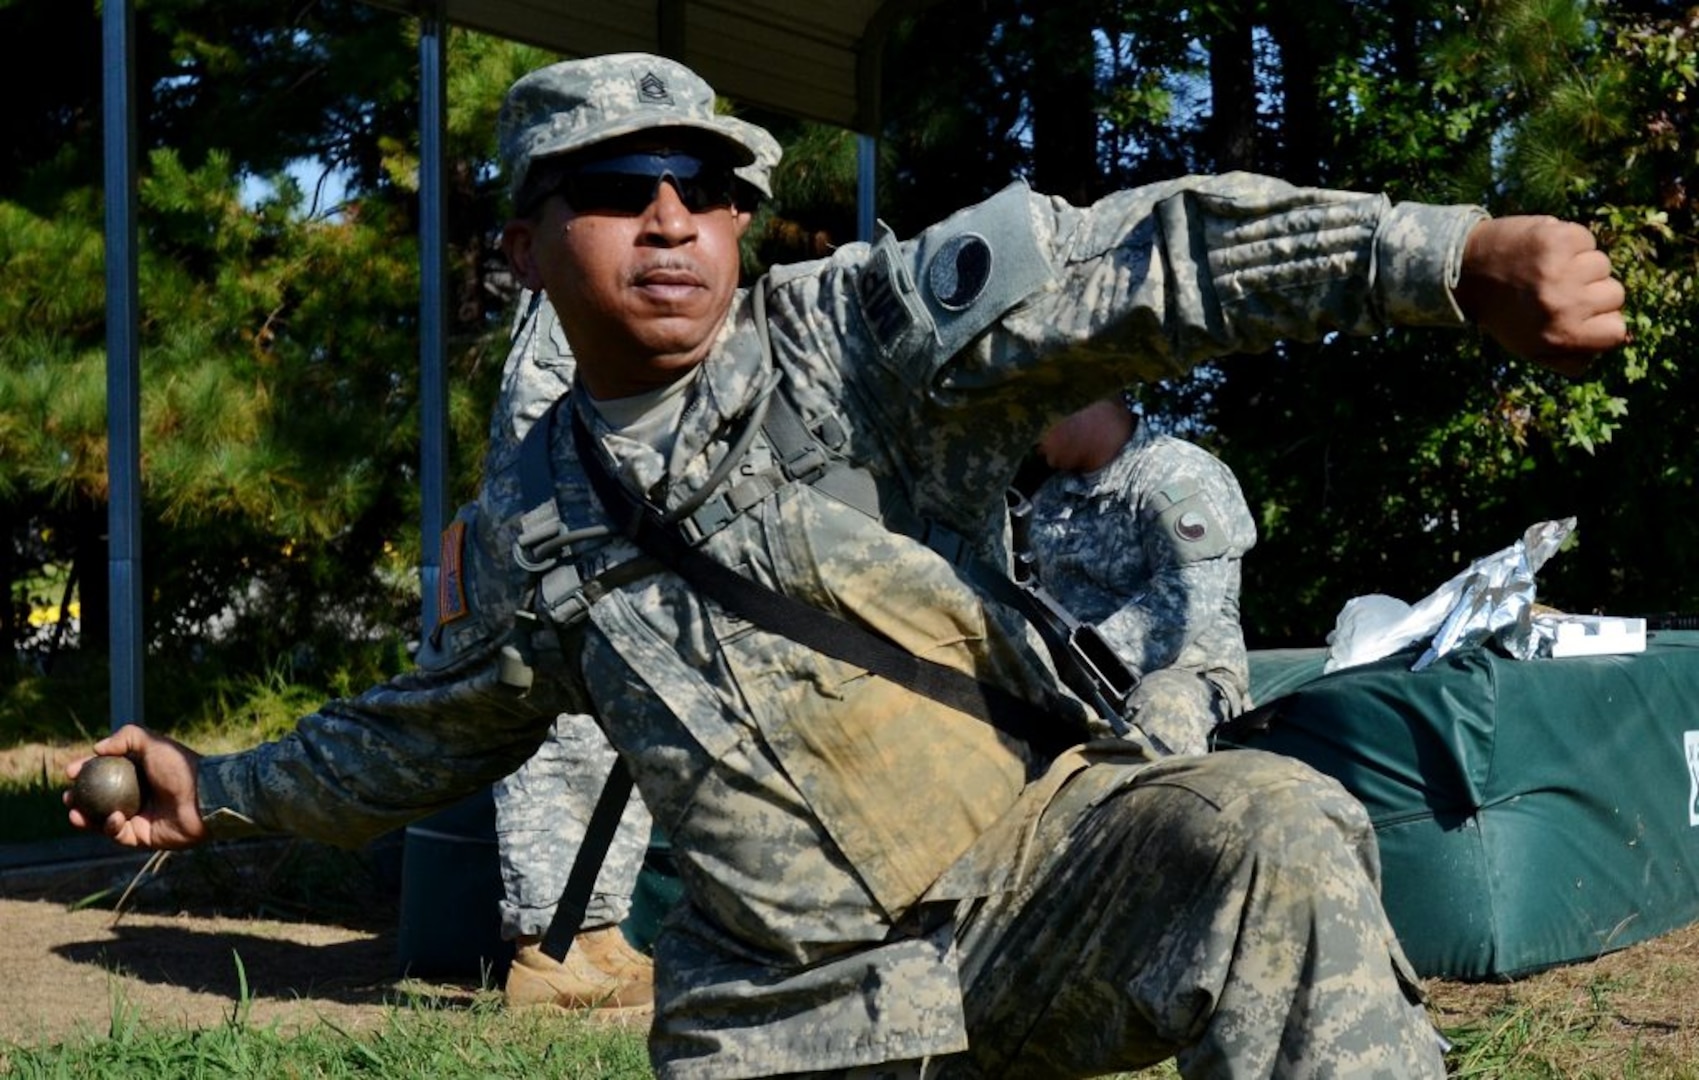 Fort Belvoir-based 29th Infantry Division to mobilize on federal active duty